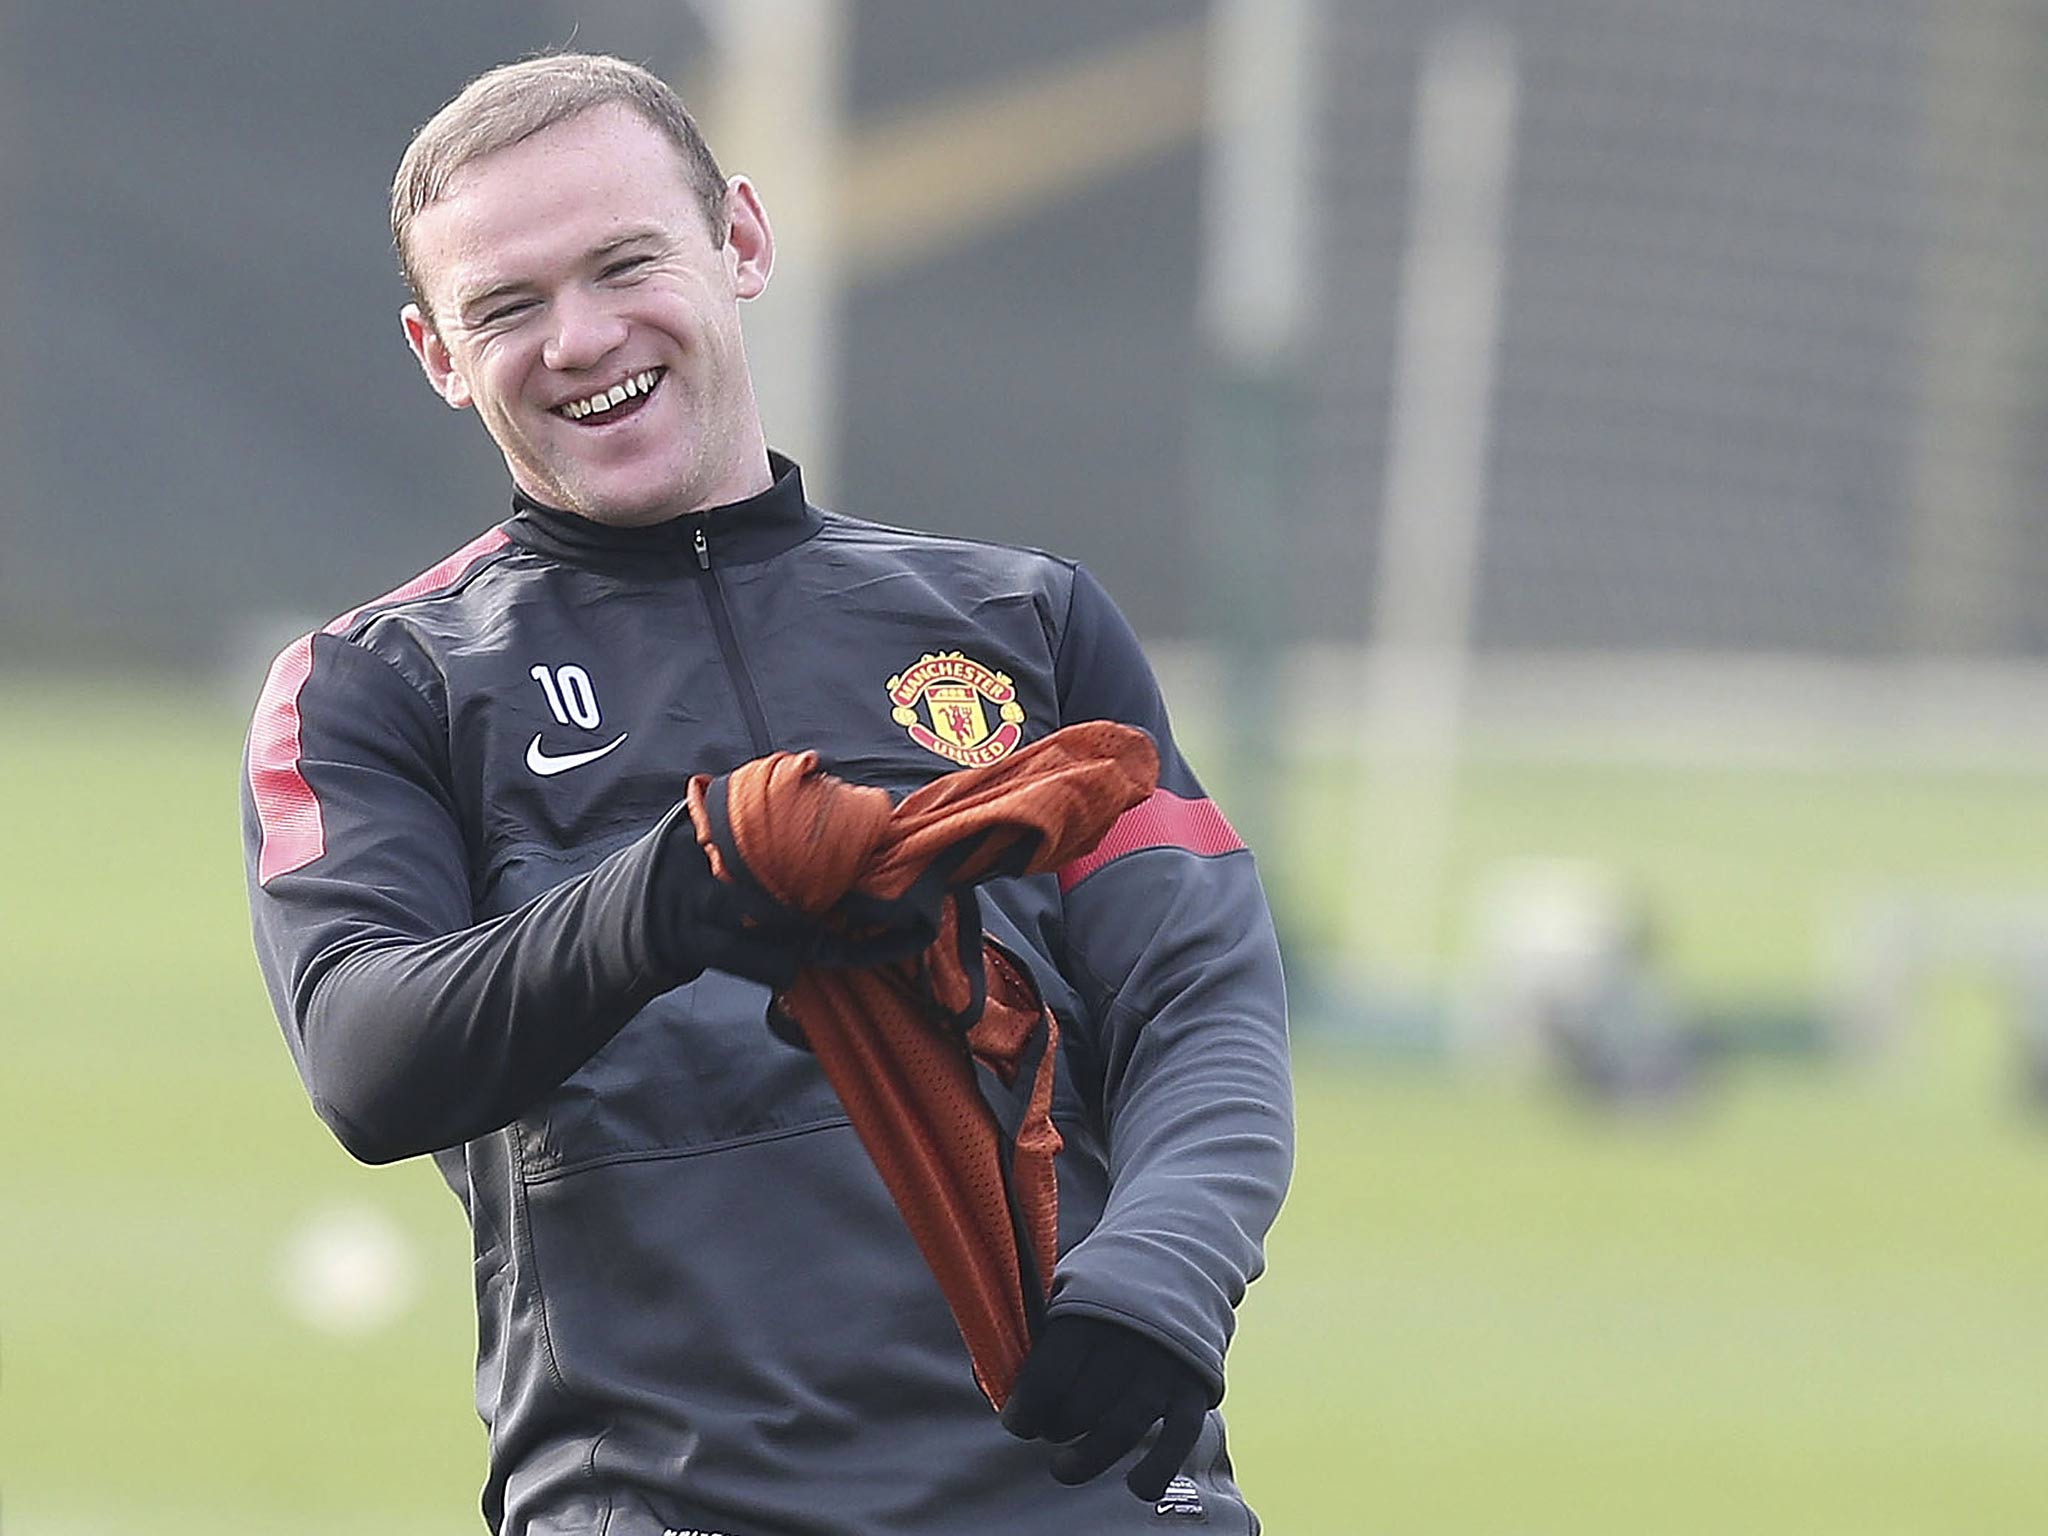 Wayne Rooney has scored three in his last two matches against Reading